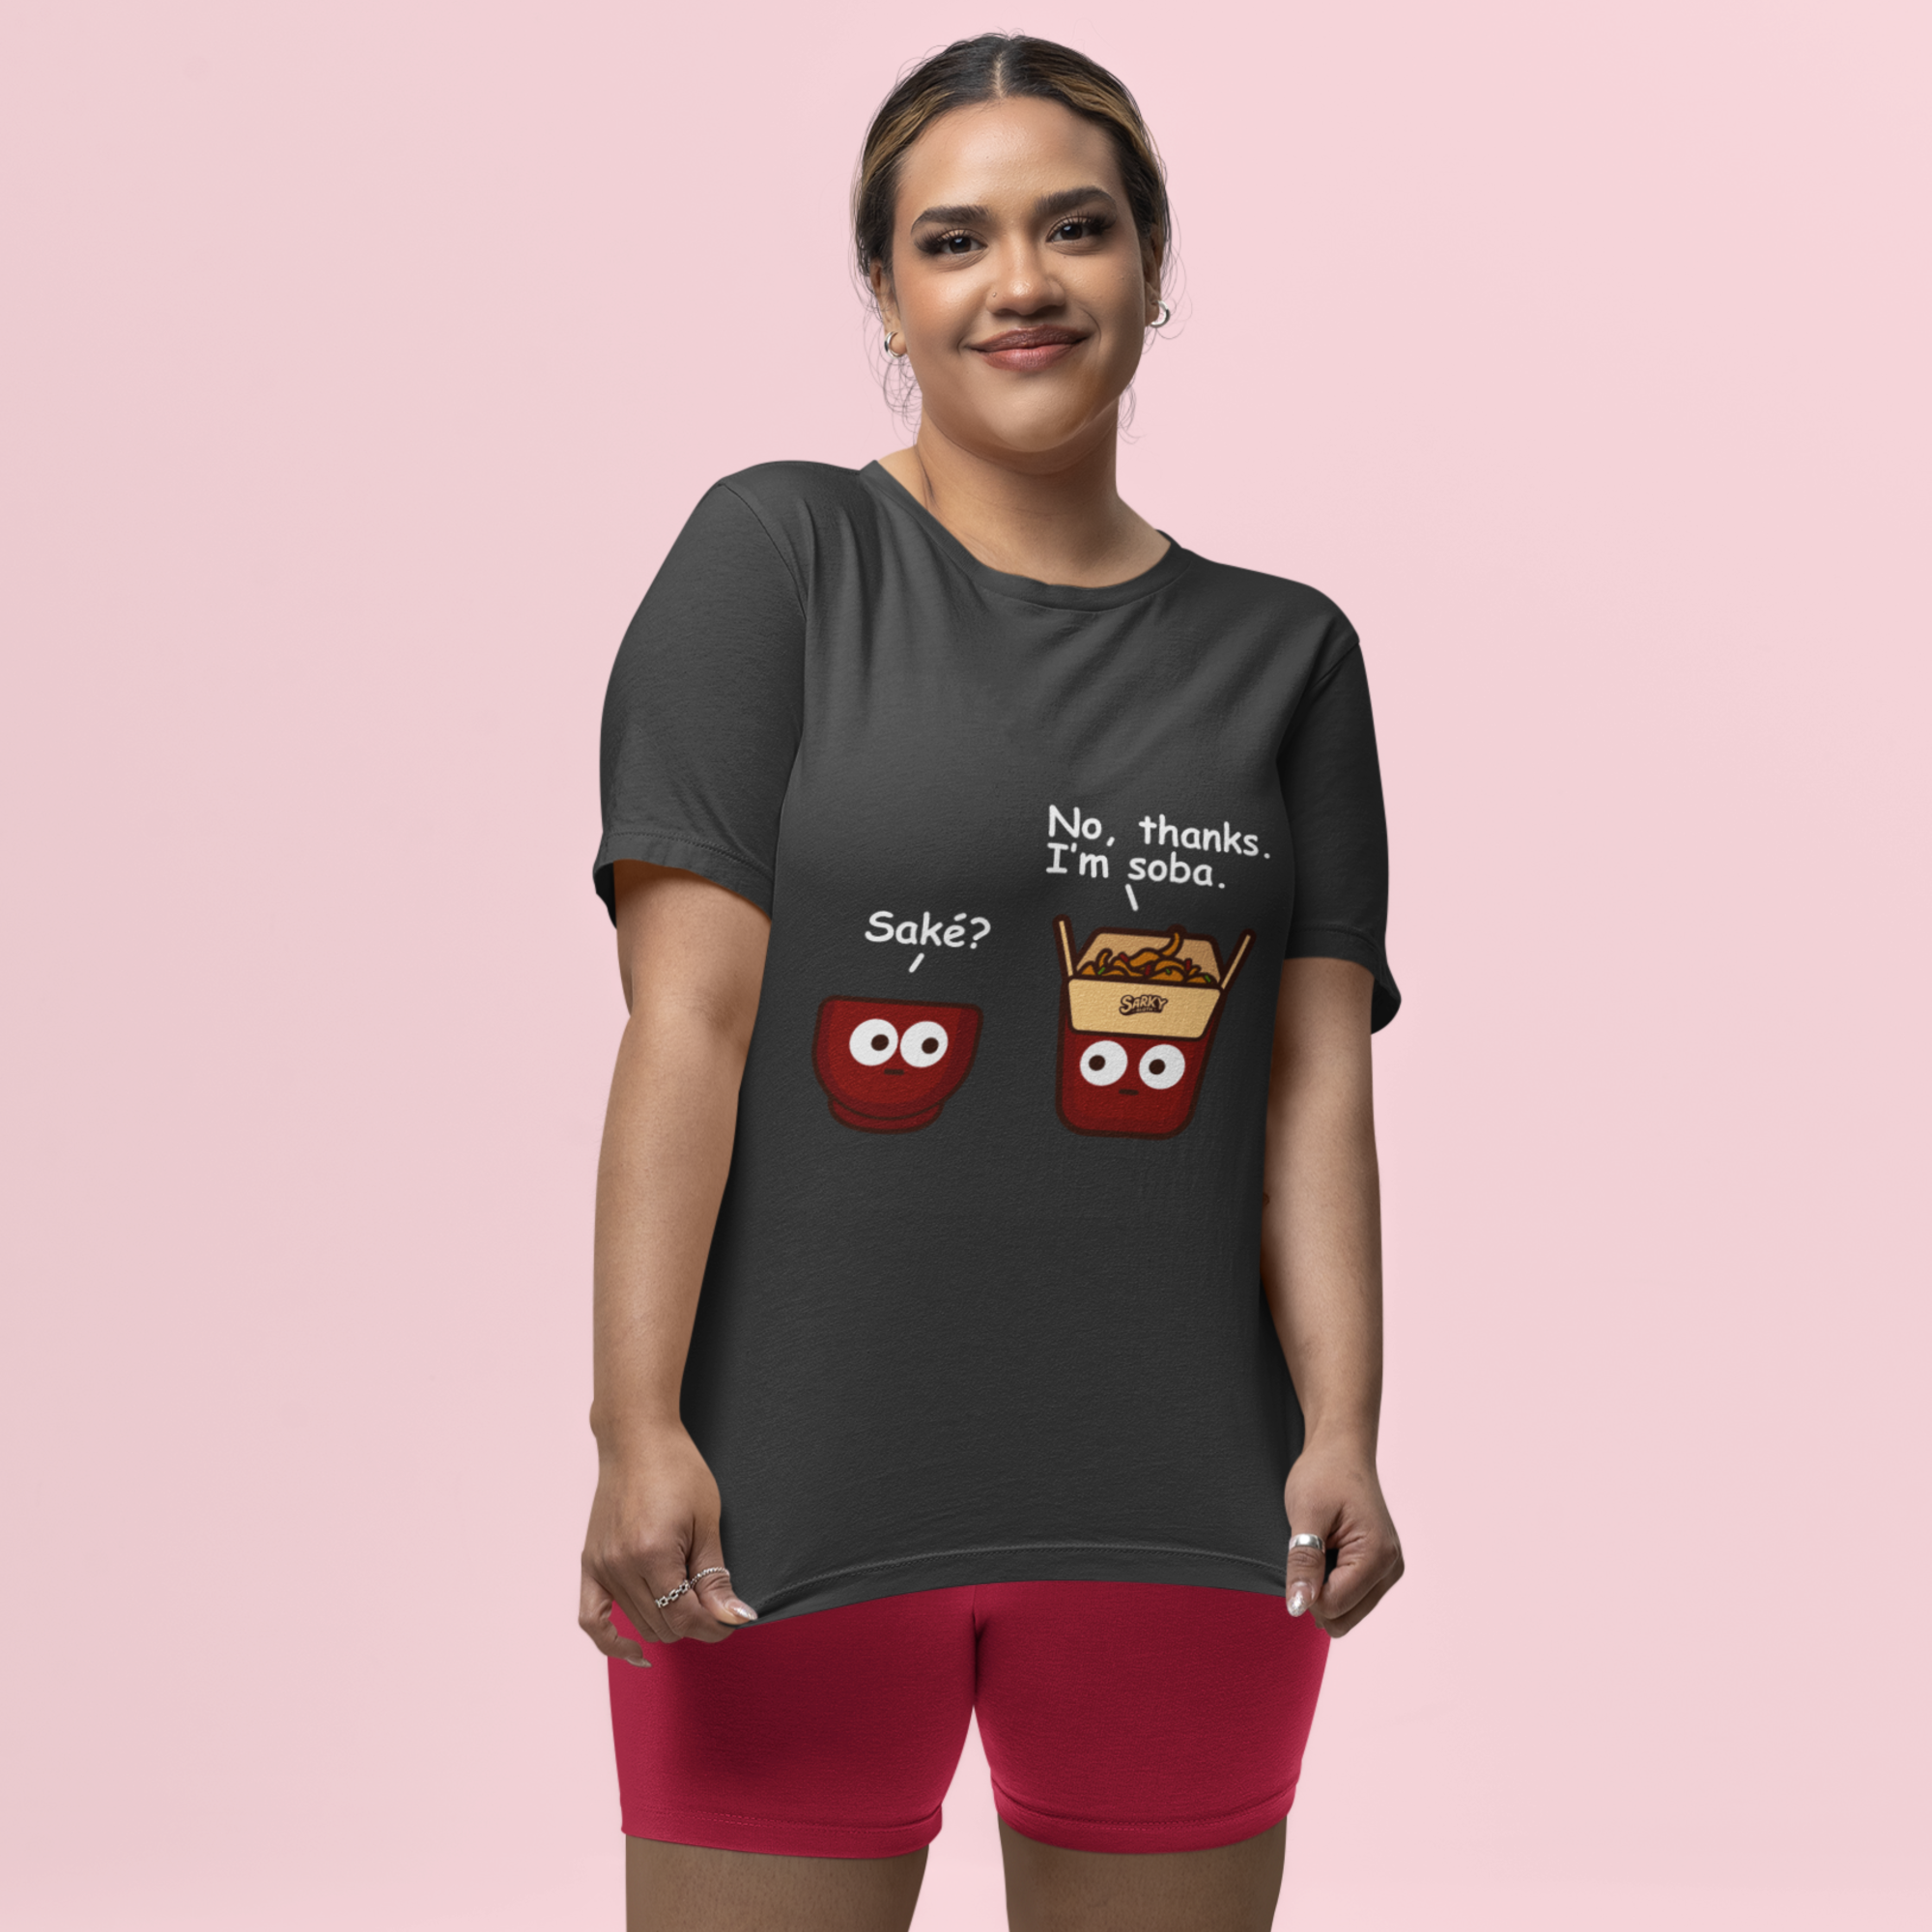 sarky sloth, graphic tees for men, graphic tees for women, customized t-shirts, high-quality graphic tees, unique t-shirt prints